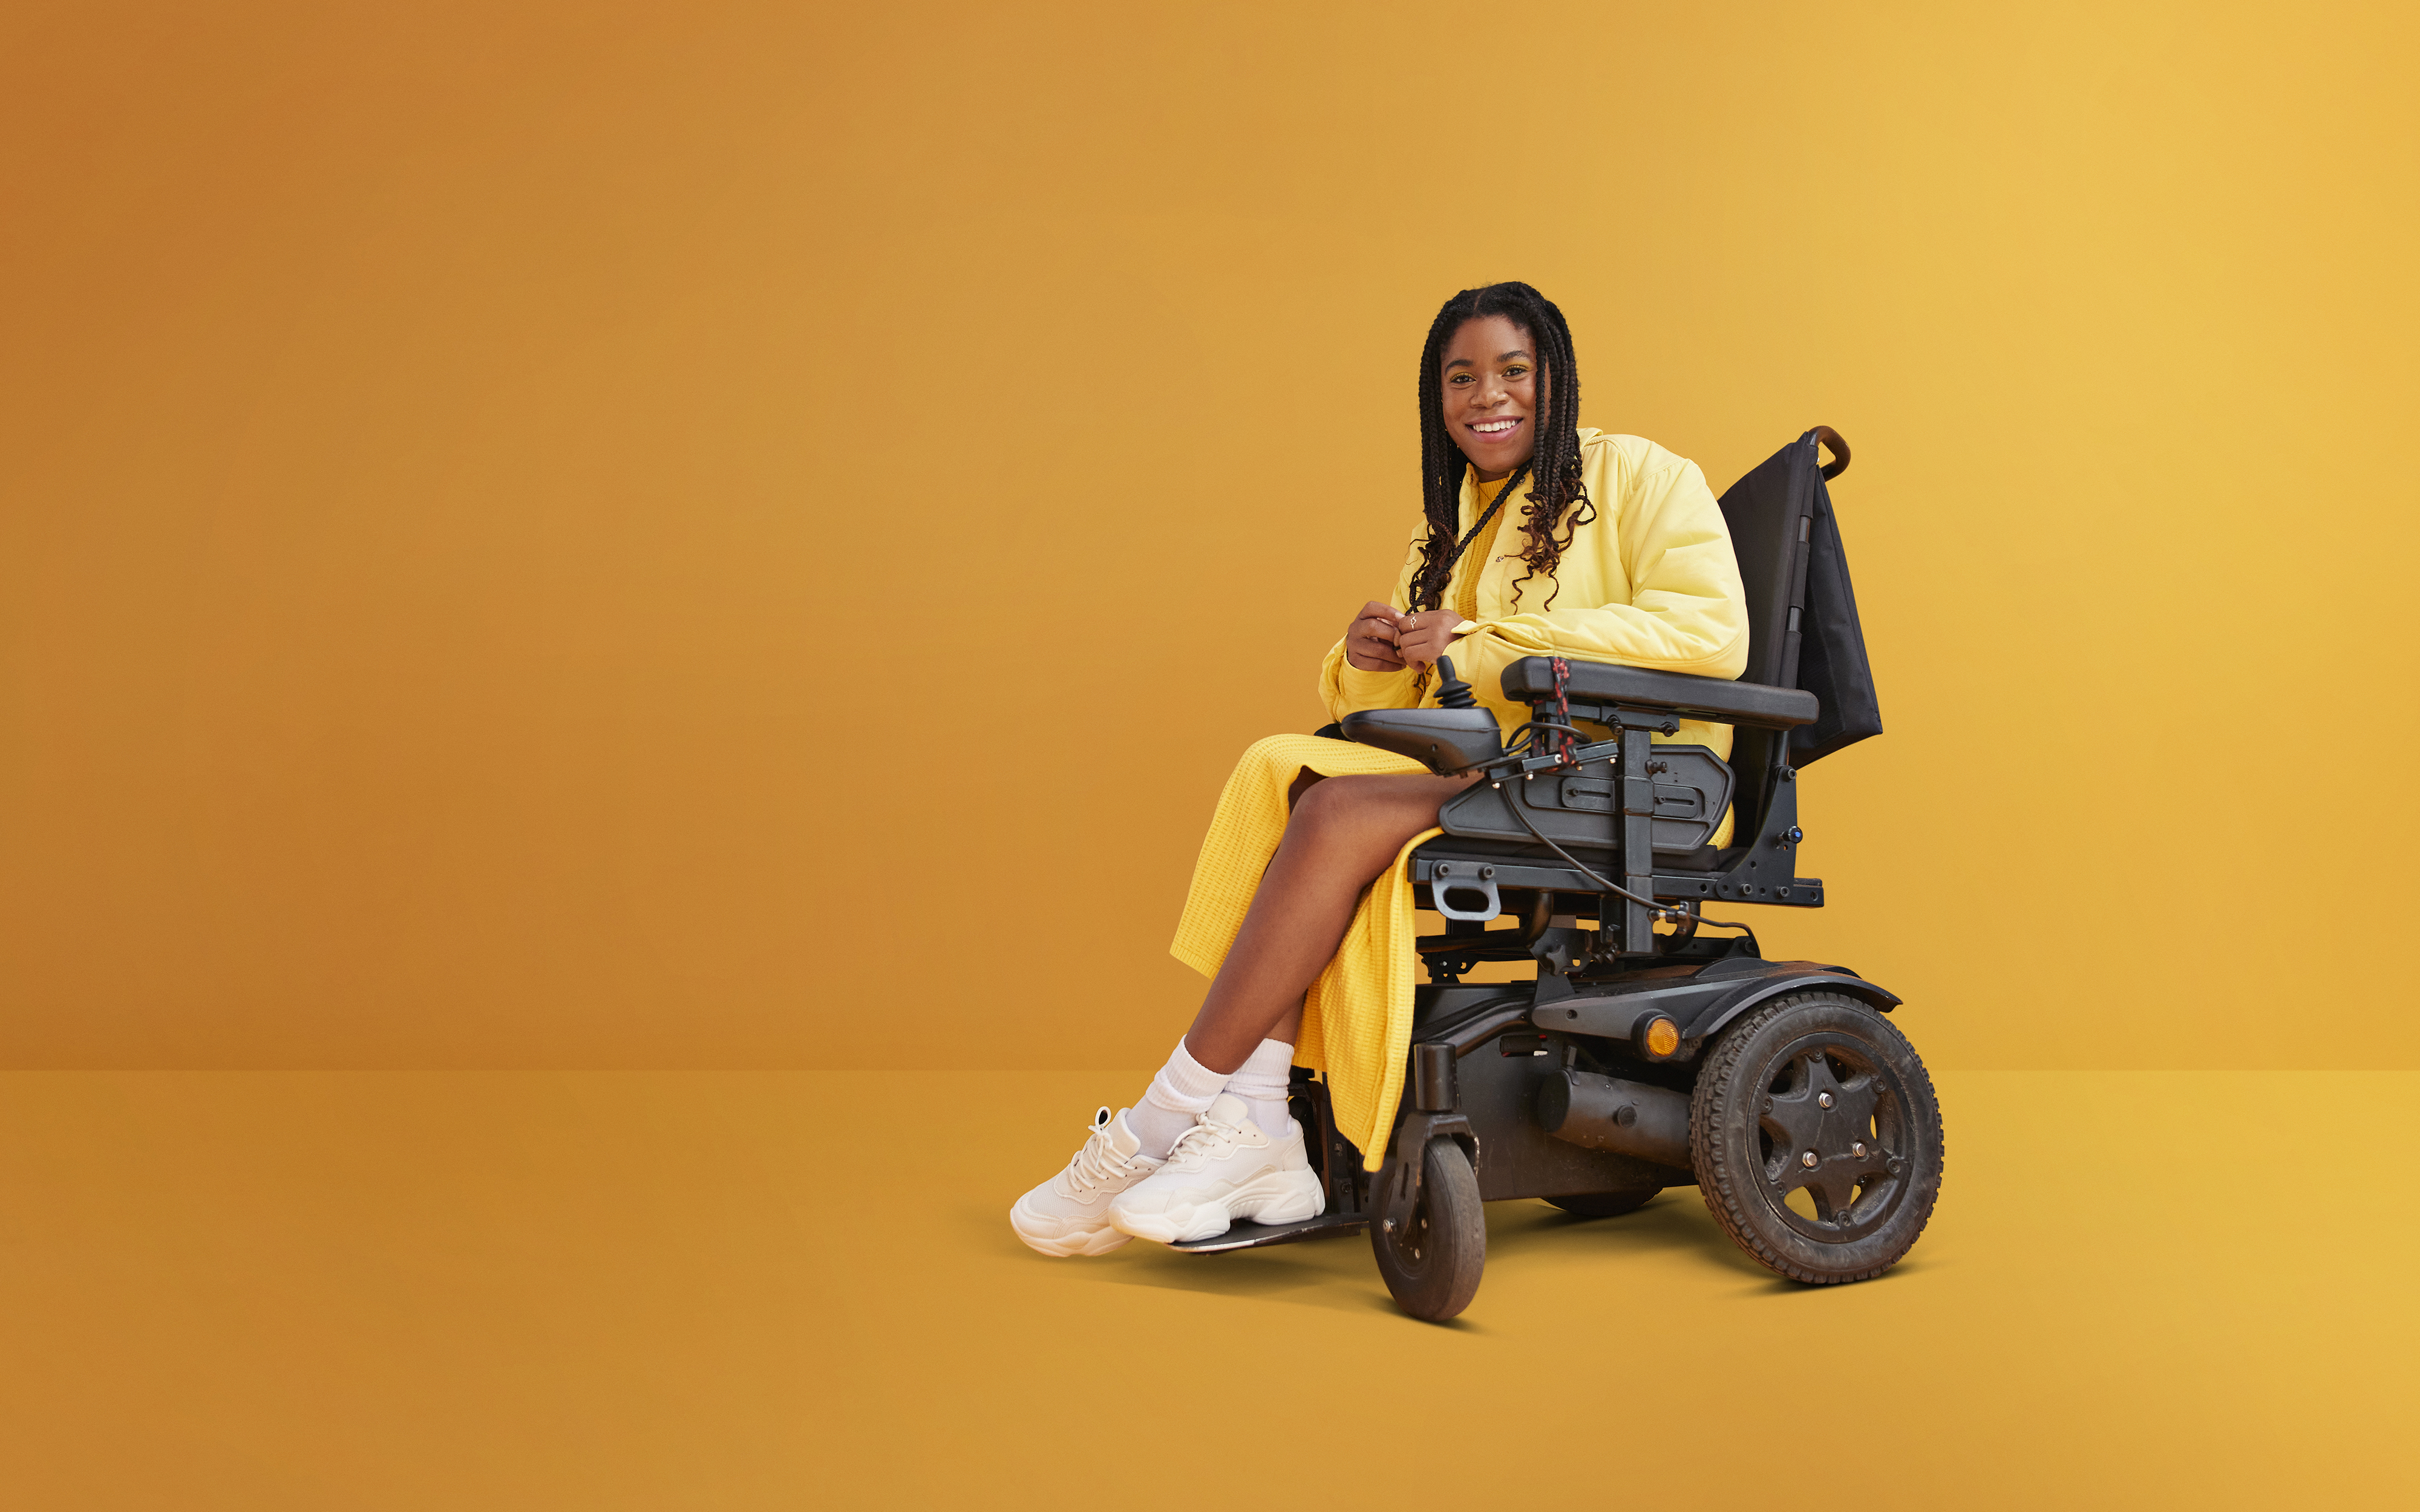 Two Brands That Are Redefining Inclusive Fashion by Accommodating Disability